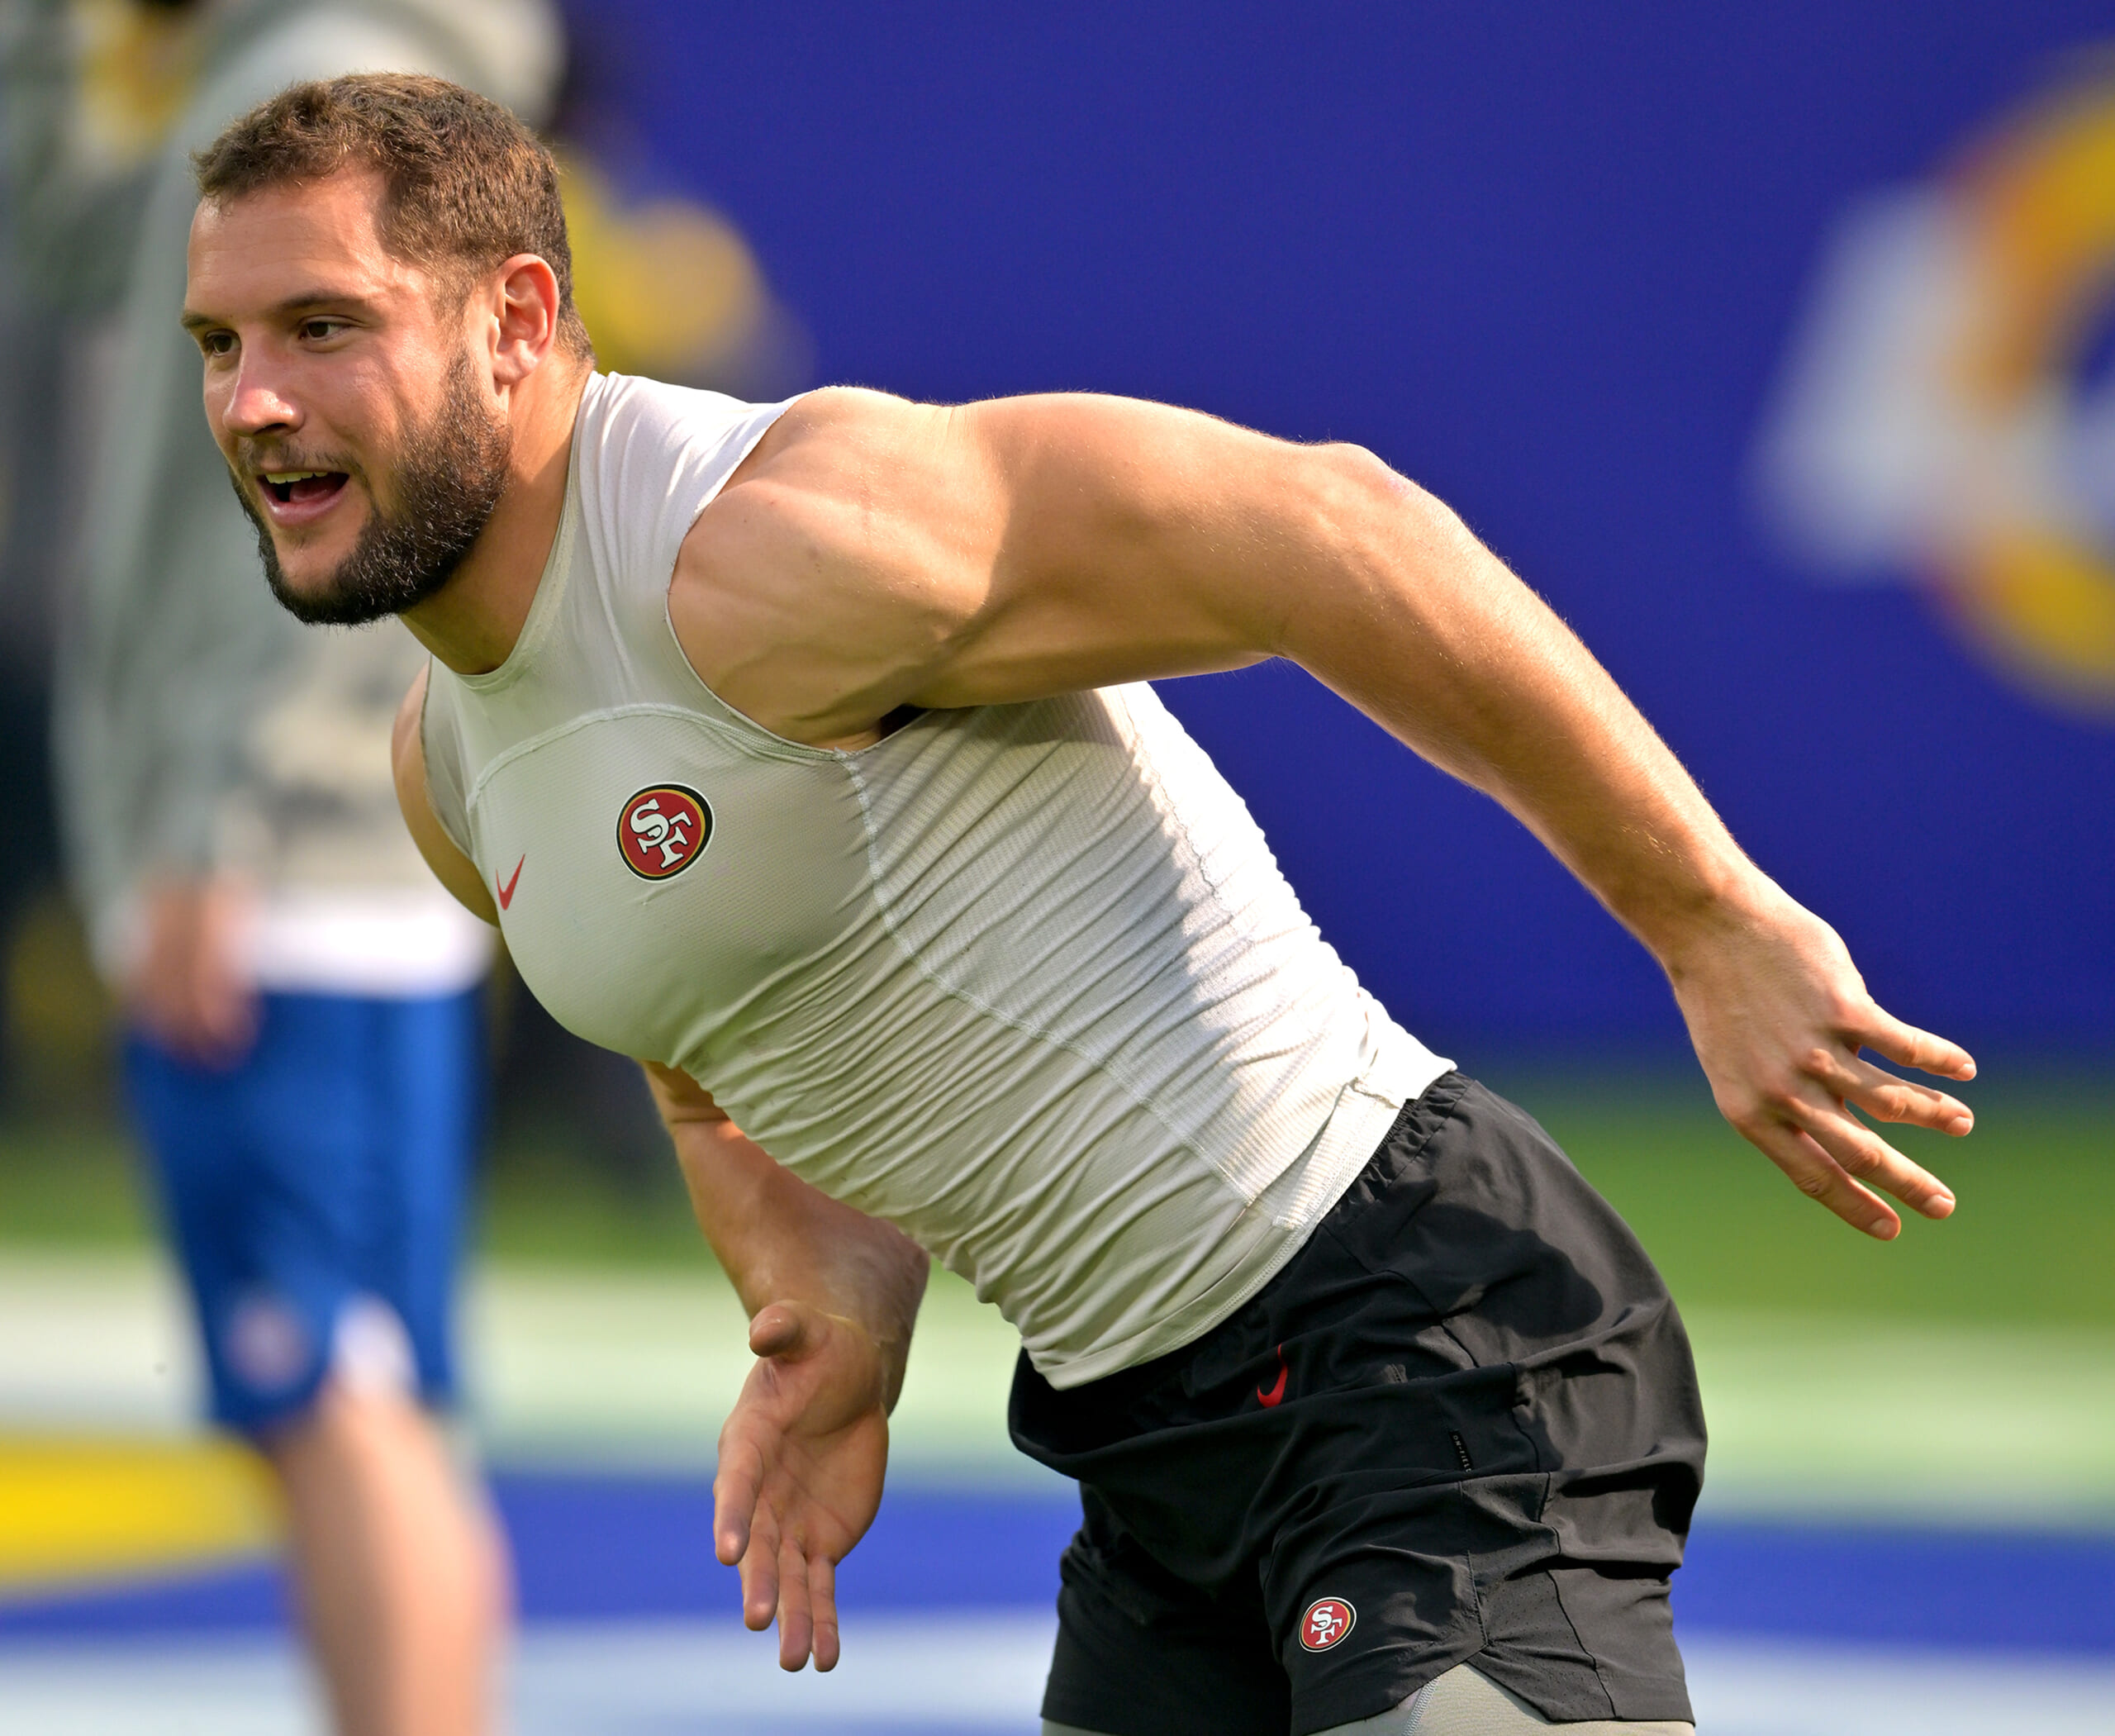 How Much Will Nick Bosa's Next Contract Be Worth? - Draft Network